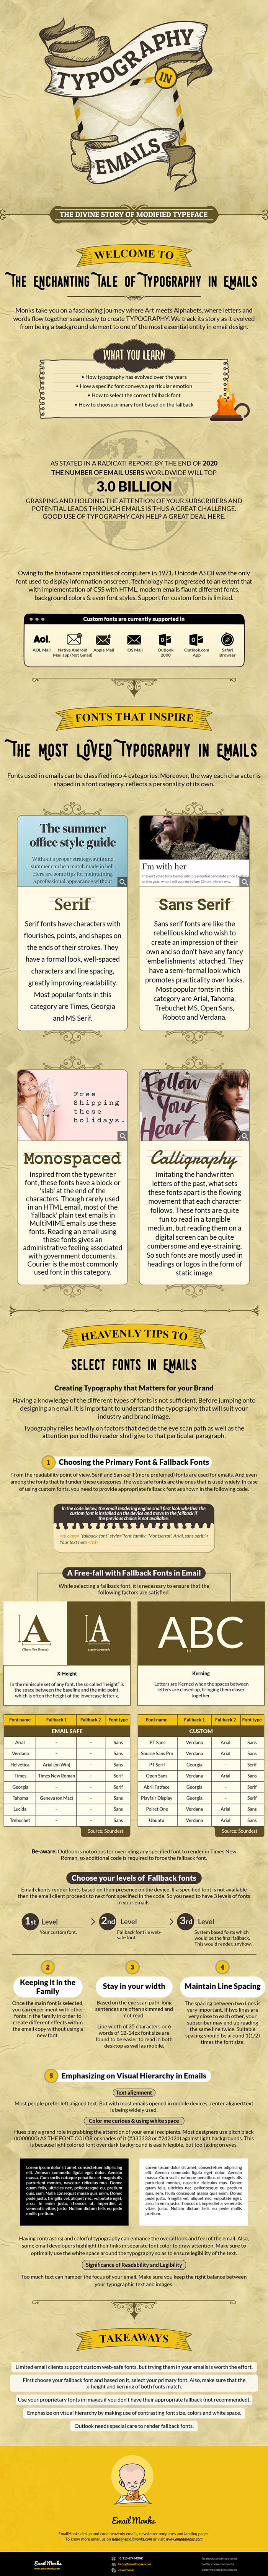 typography-in-email-infographic-2